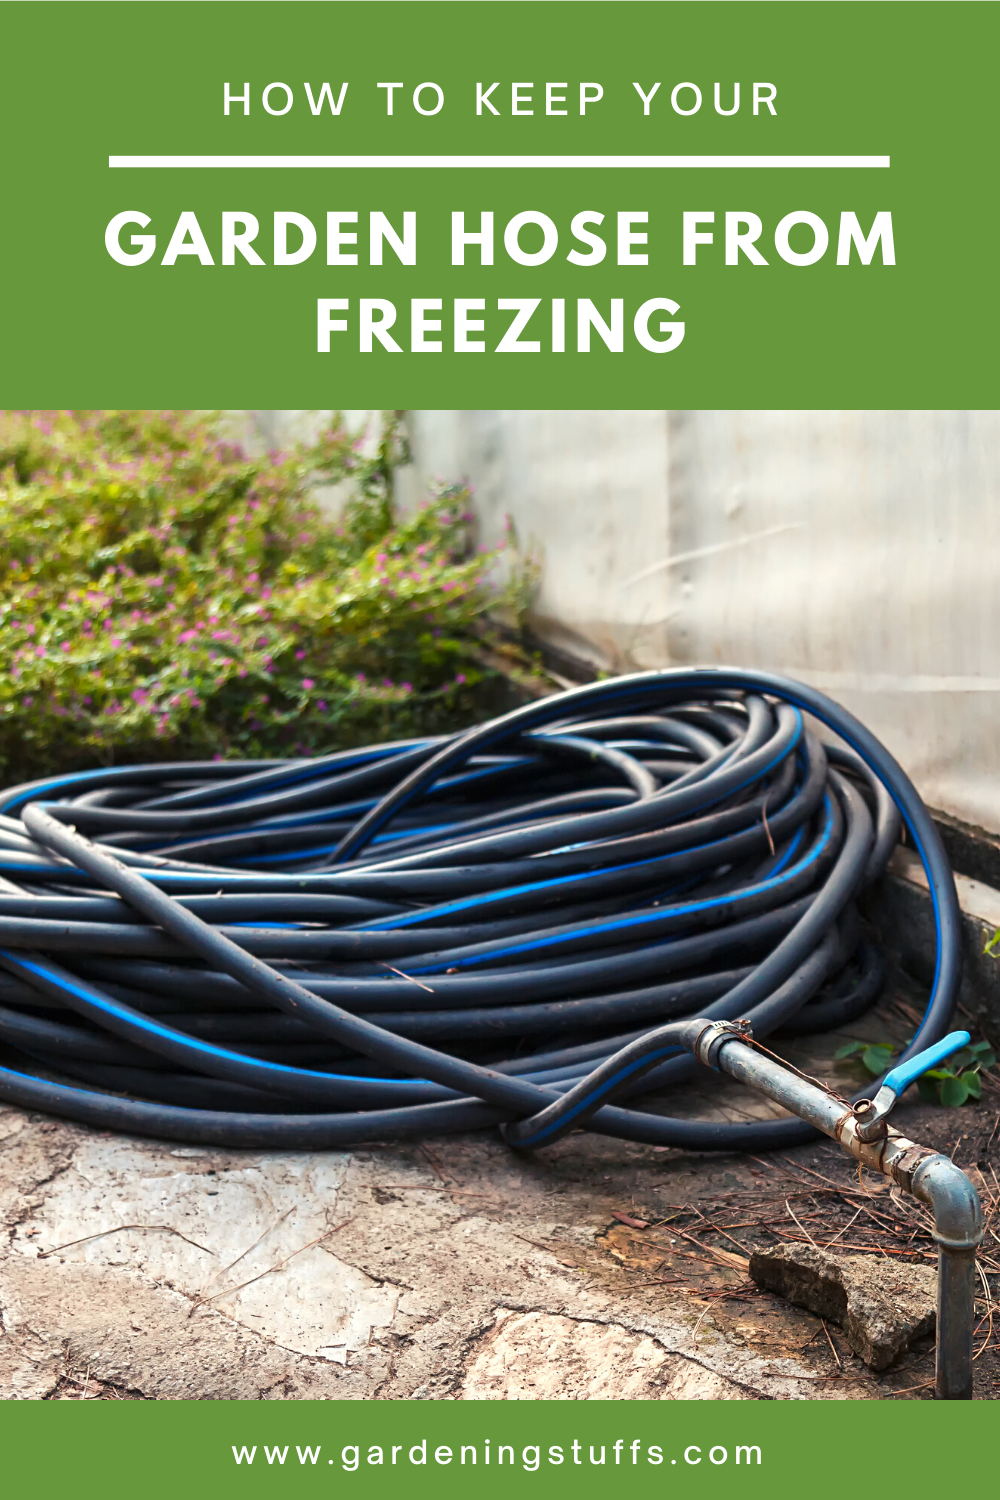 To use your hose in the winter and prevent the wear and tear, you can opt for thermal insulation and the process is quite easy. Read on to know how to prepare your hose for winter with these easy tips.